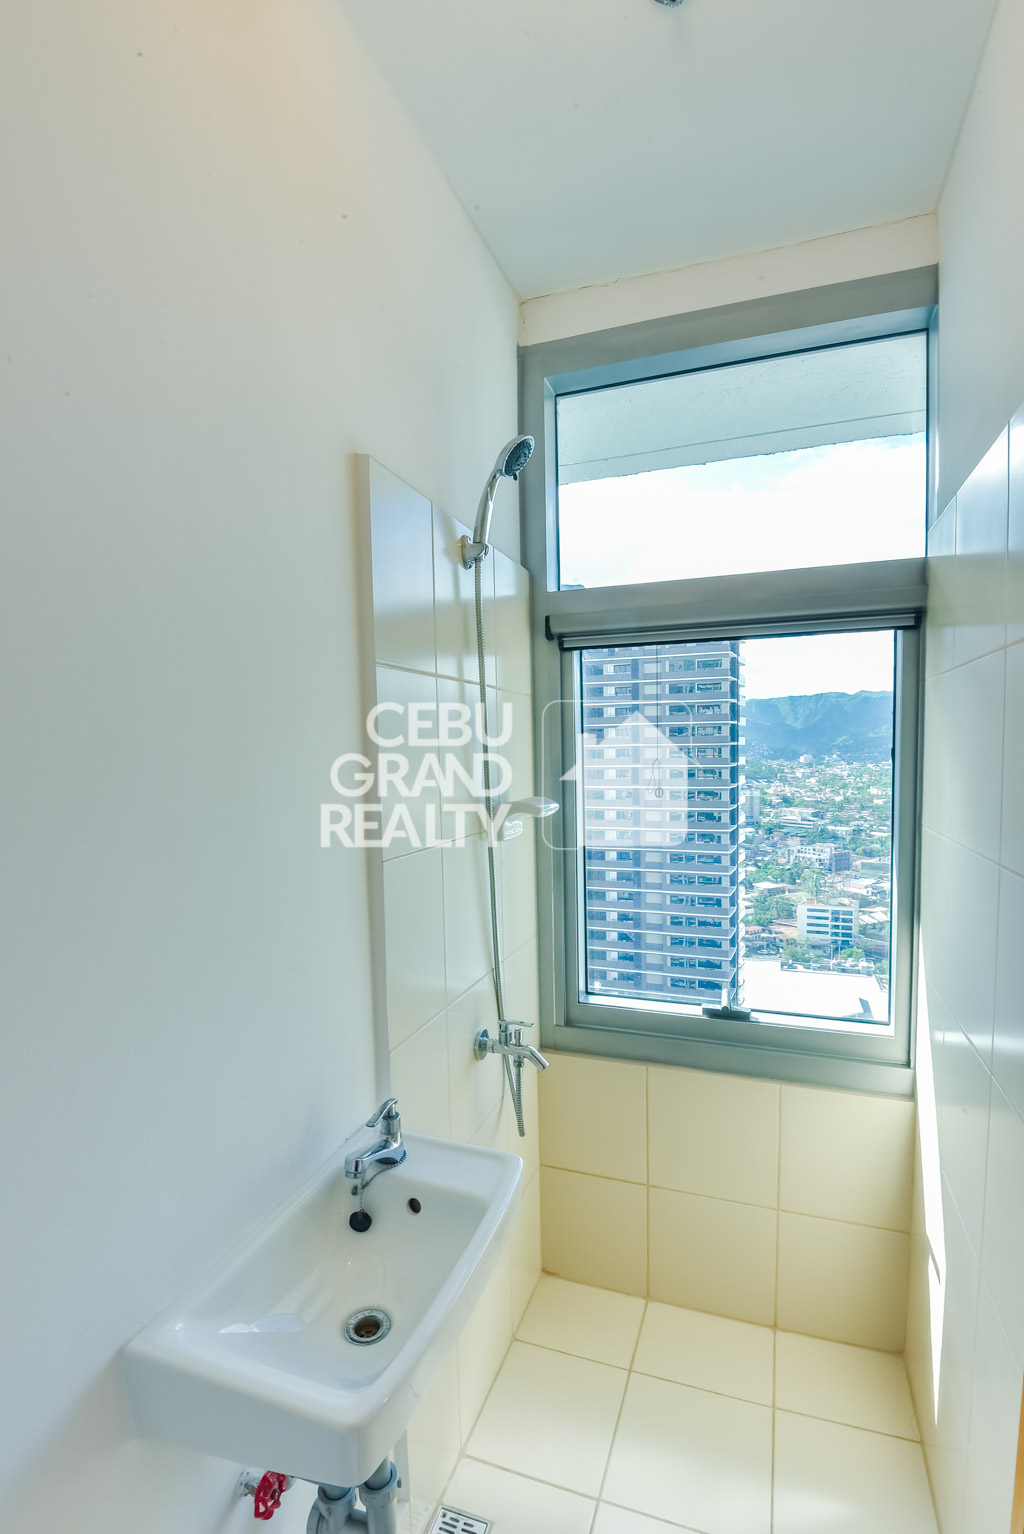 RCPP49 Furnished 3 Bedroom Condo for Rent in Park Point Residences - 18